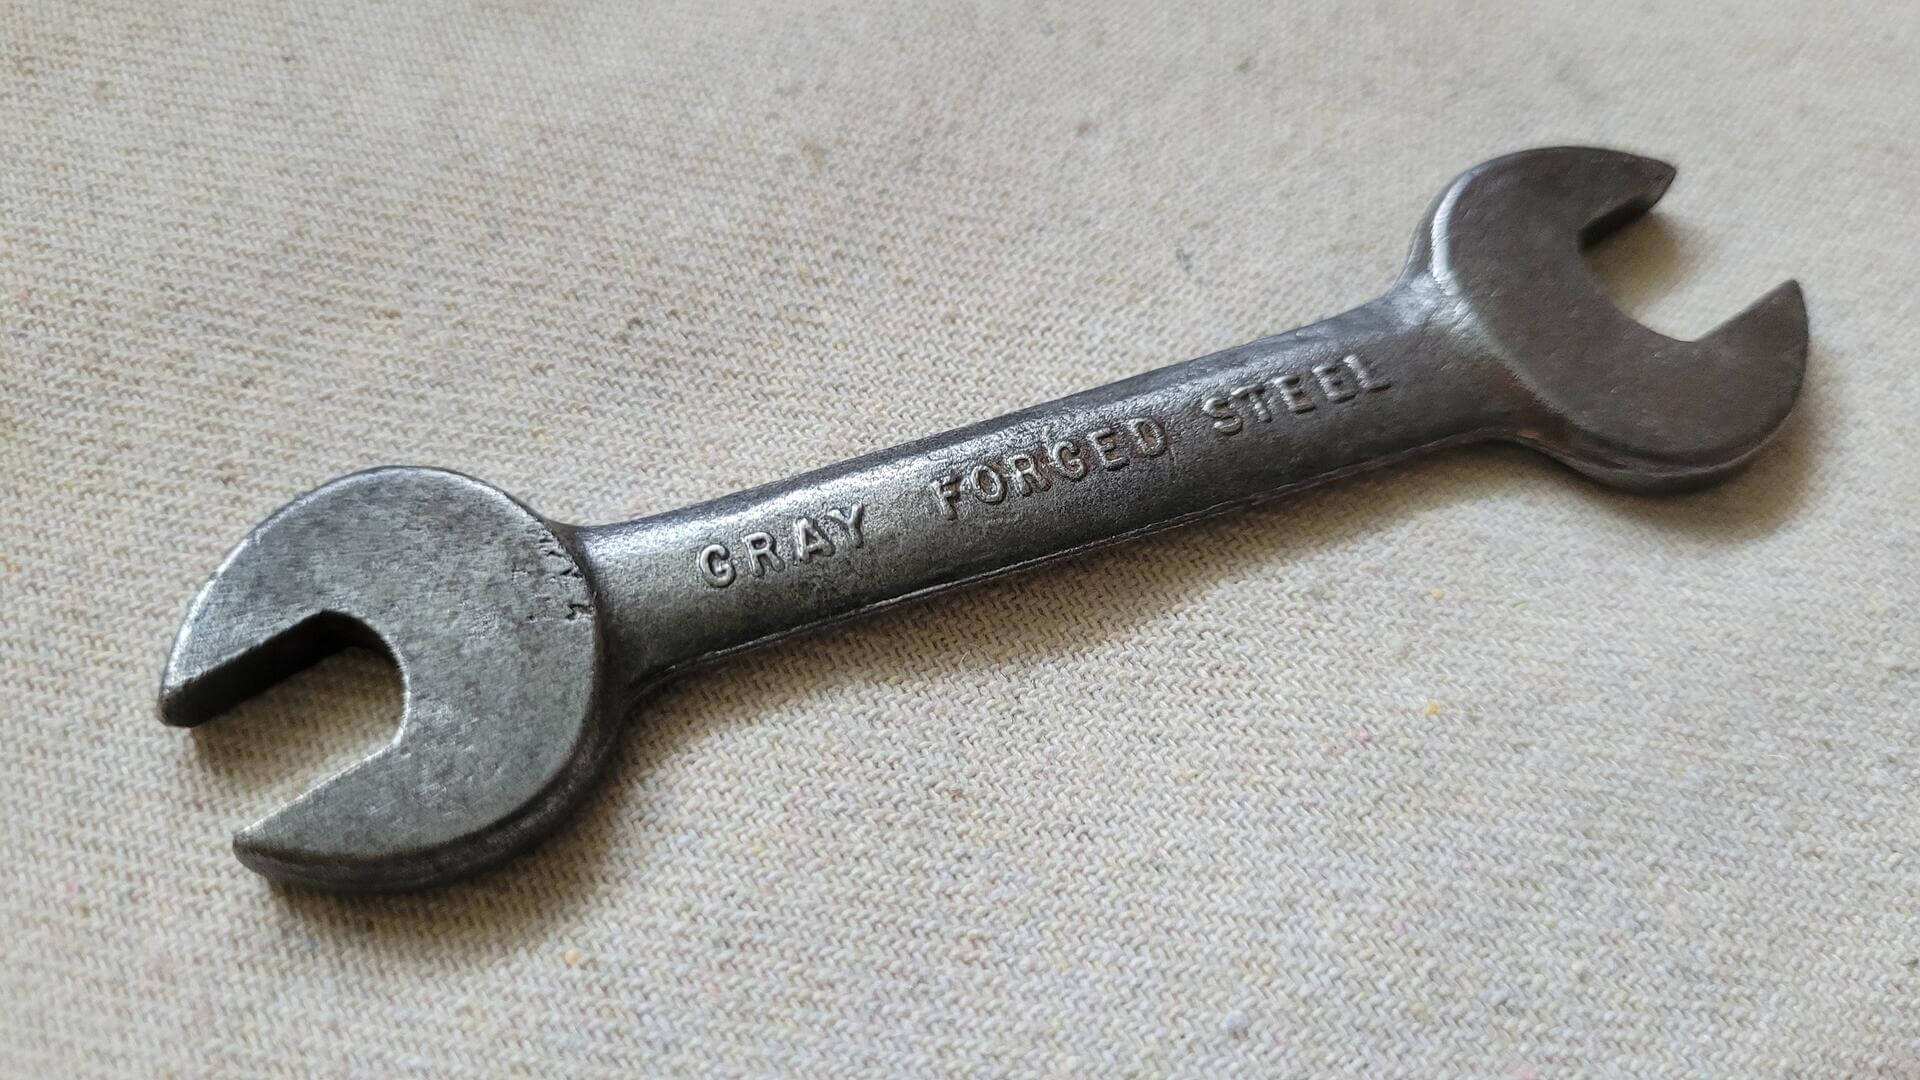 Vintage Gray Canada Tools Stubby Open End Wrench 3/8 and 7/16 - Antique made in Canada collectible mechanic hand tools